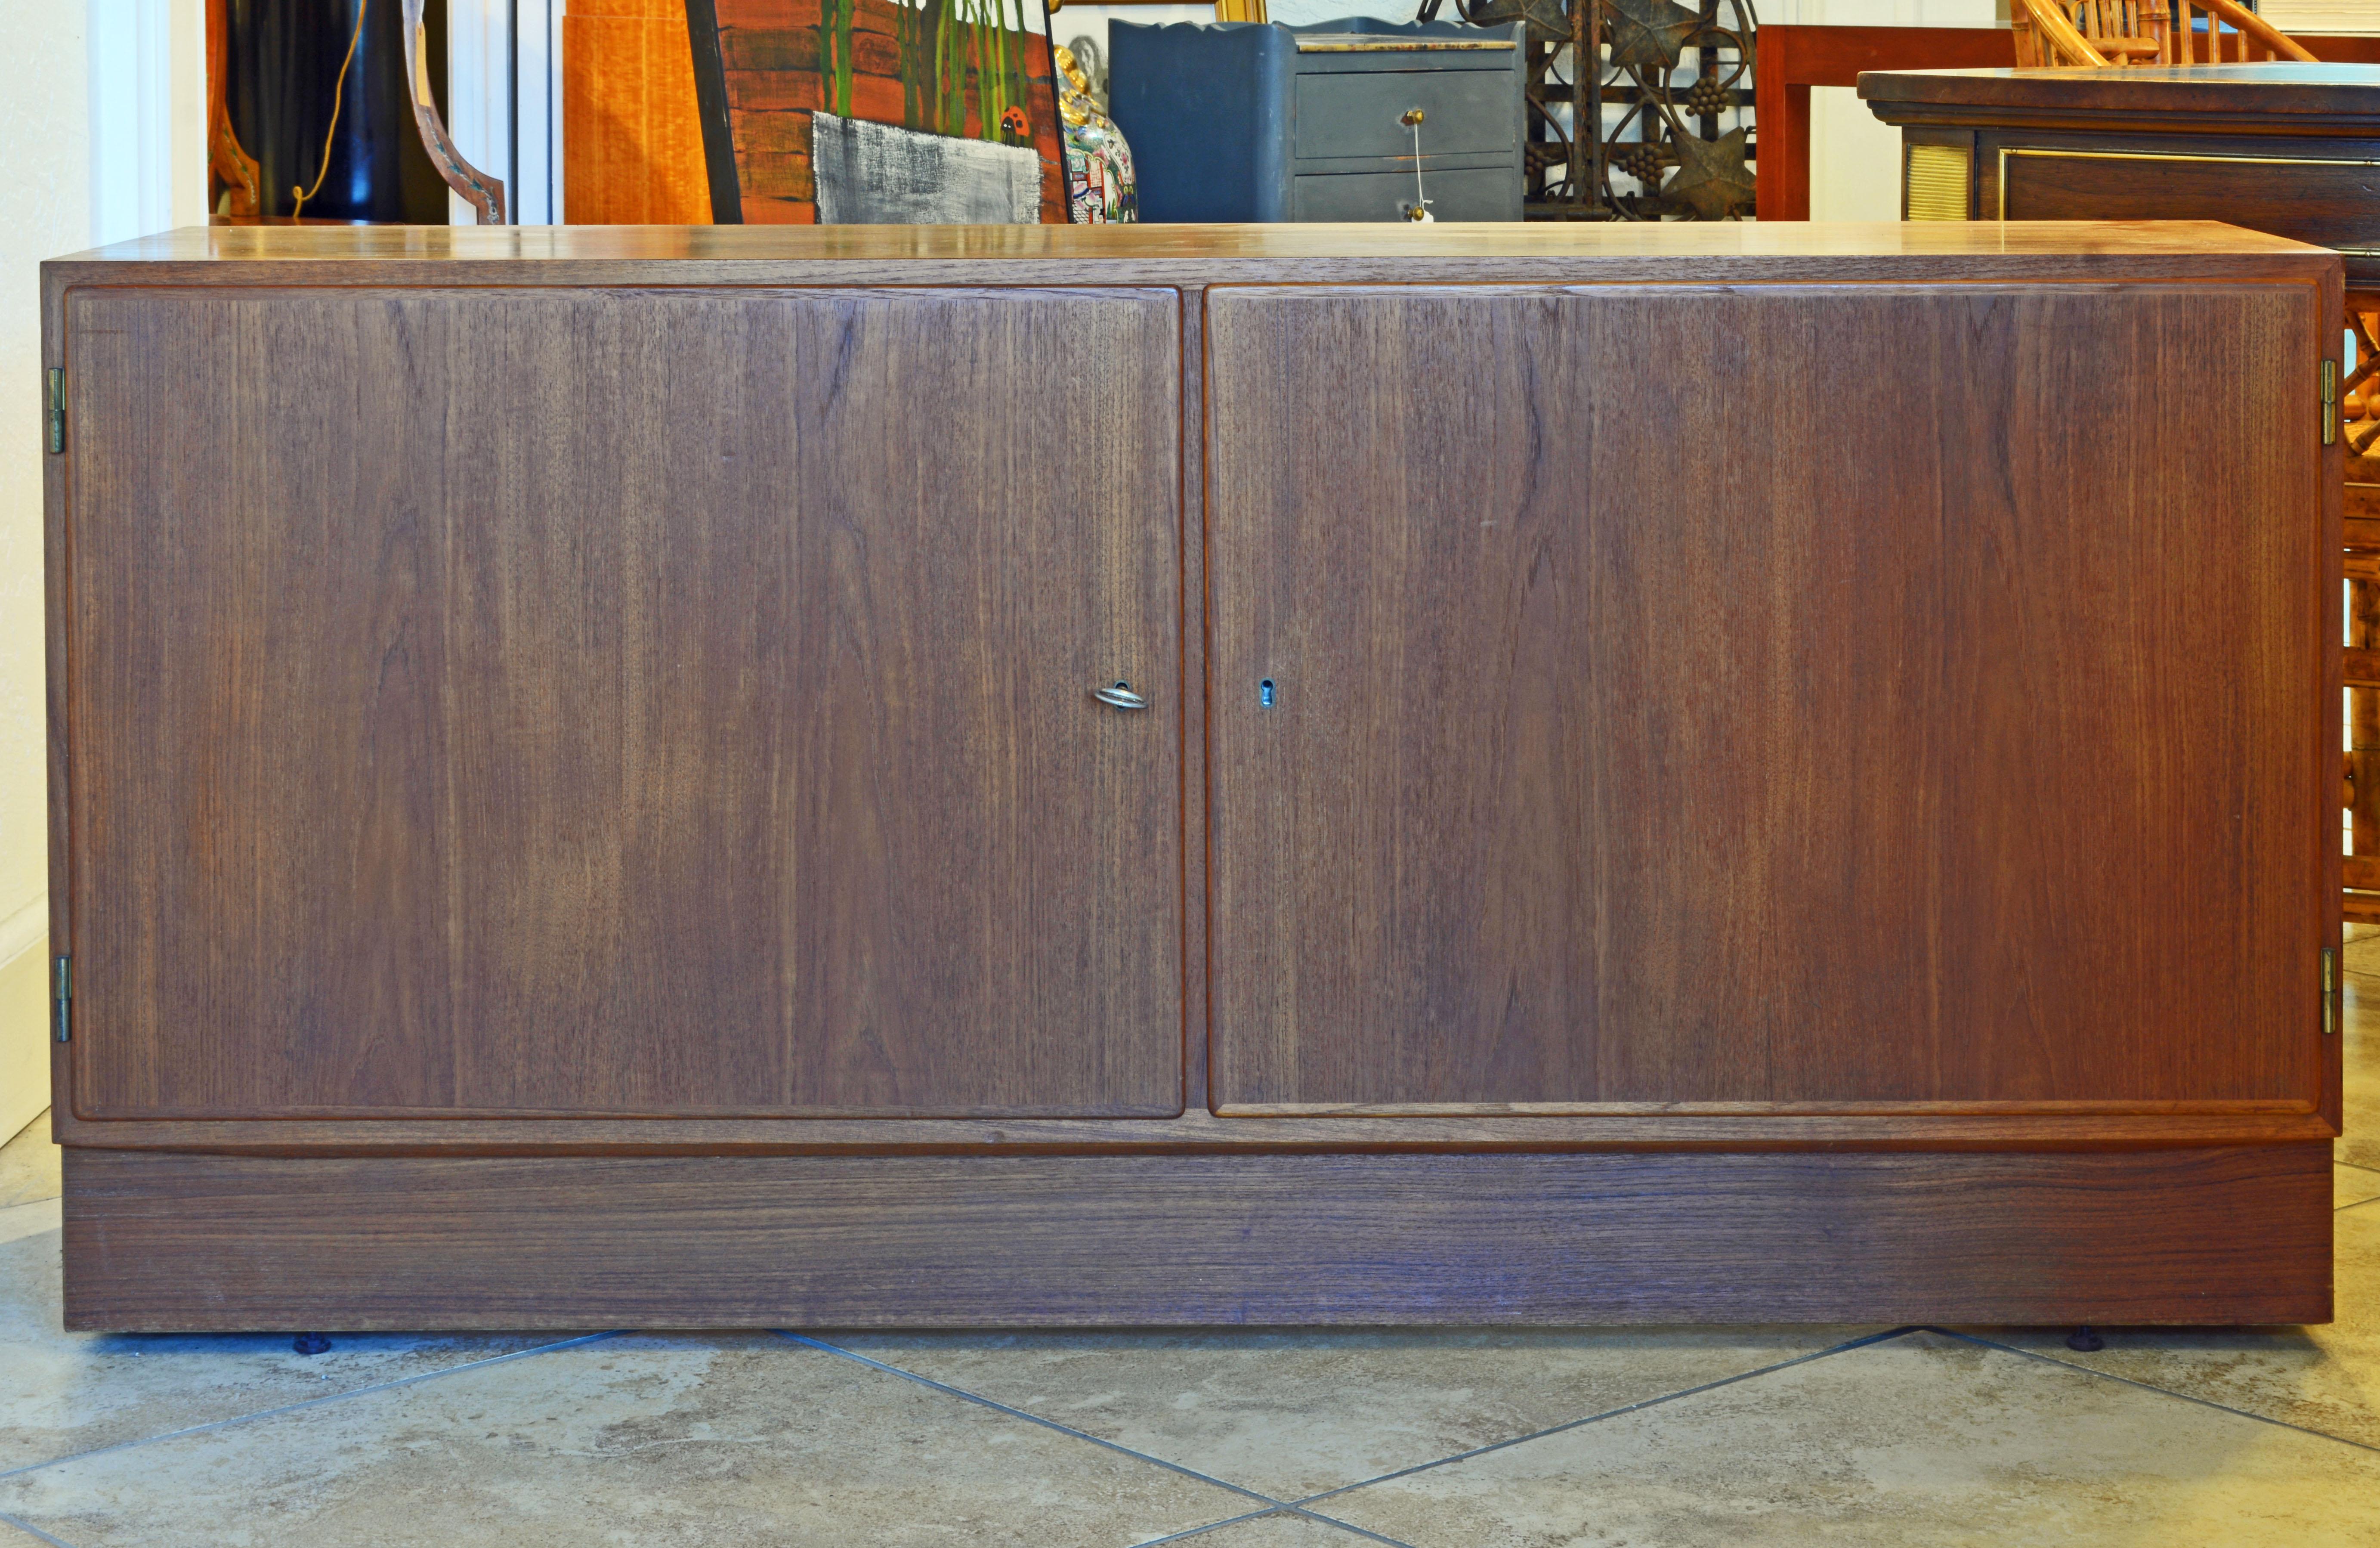 In a Classic Minimalist design this fine piece of furniture shows beautifully grained teak on the top, front and sides. The sideboard features two doors with locks opening up to an interior fitted with drawers and adjustable shelves. The Poul